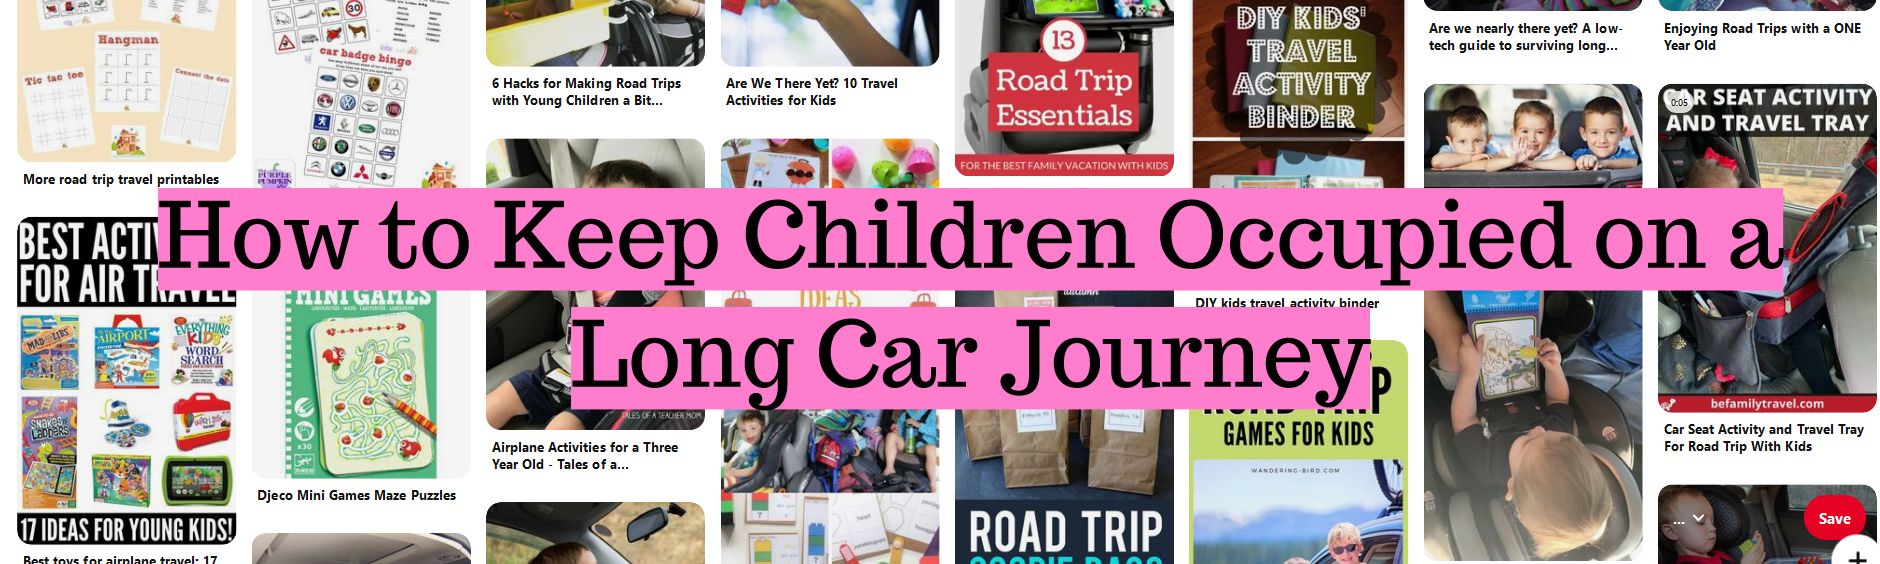 How to Keep Children Occupied on a Long Car Journey